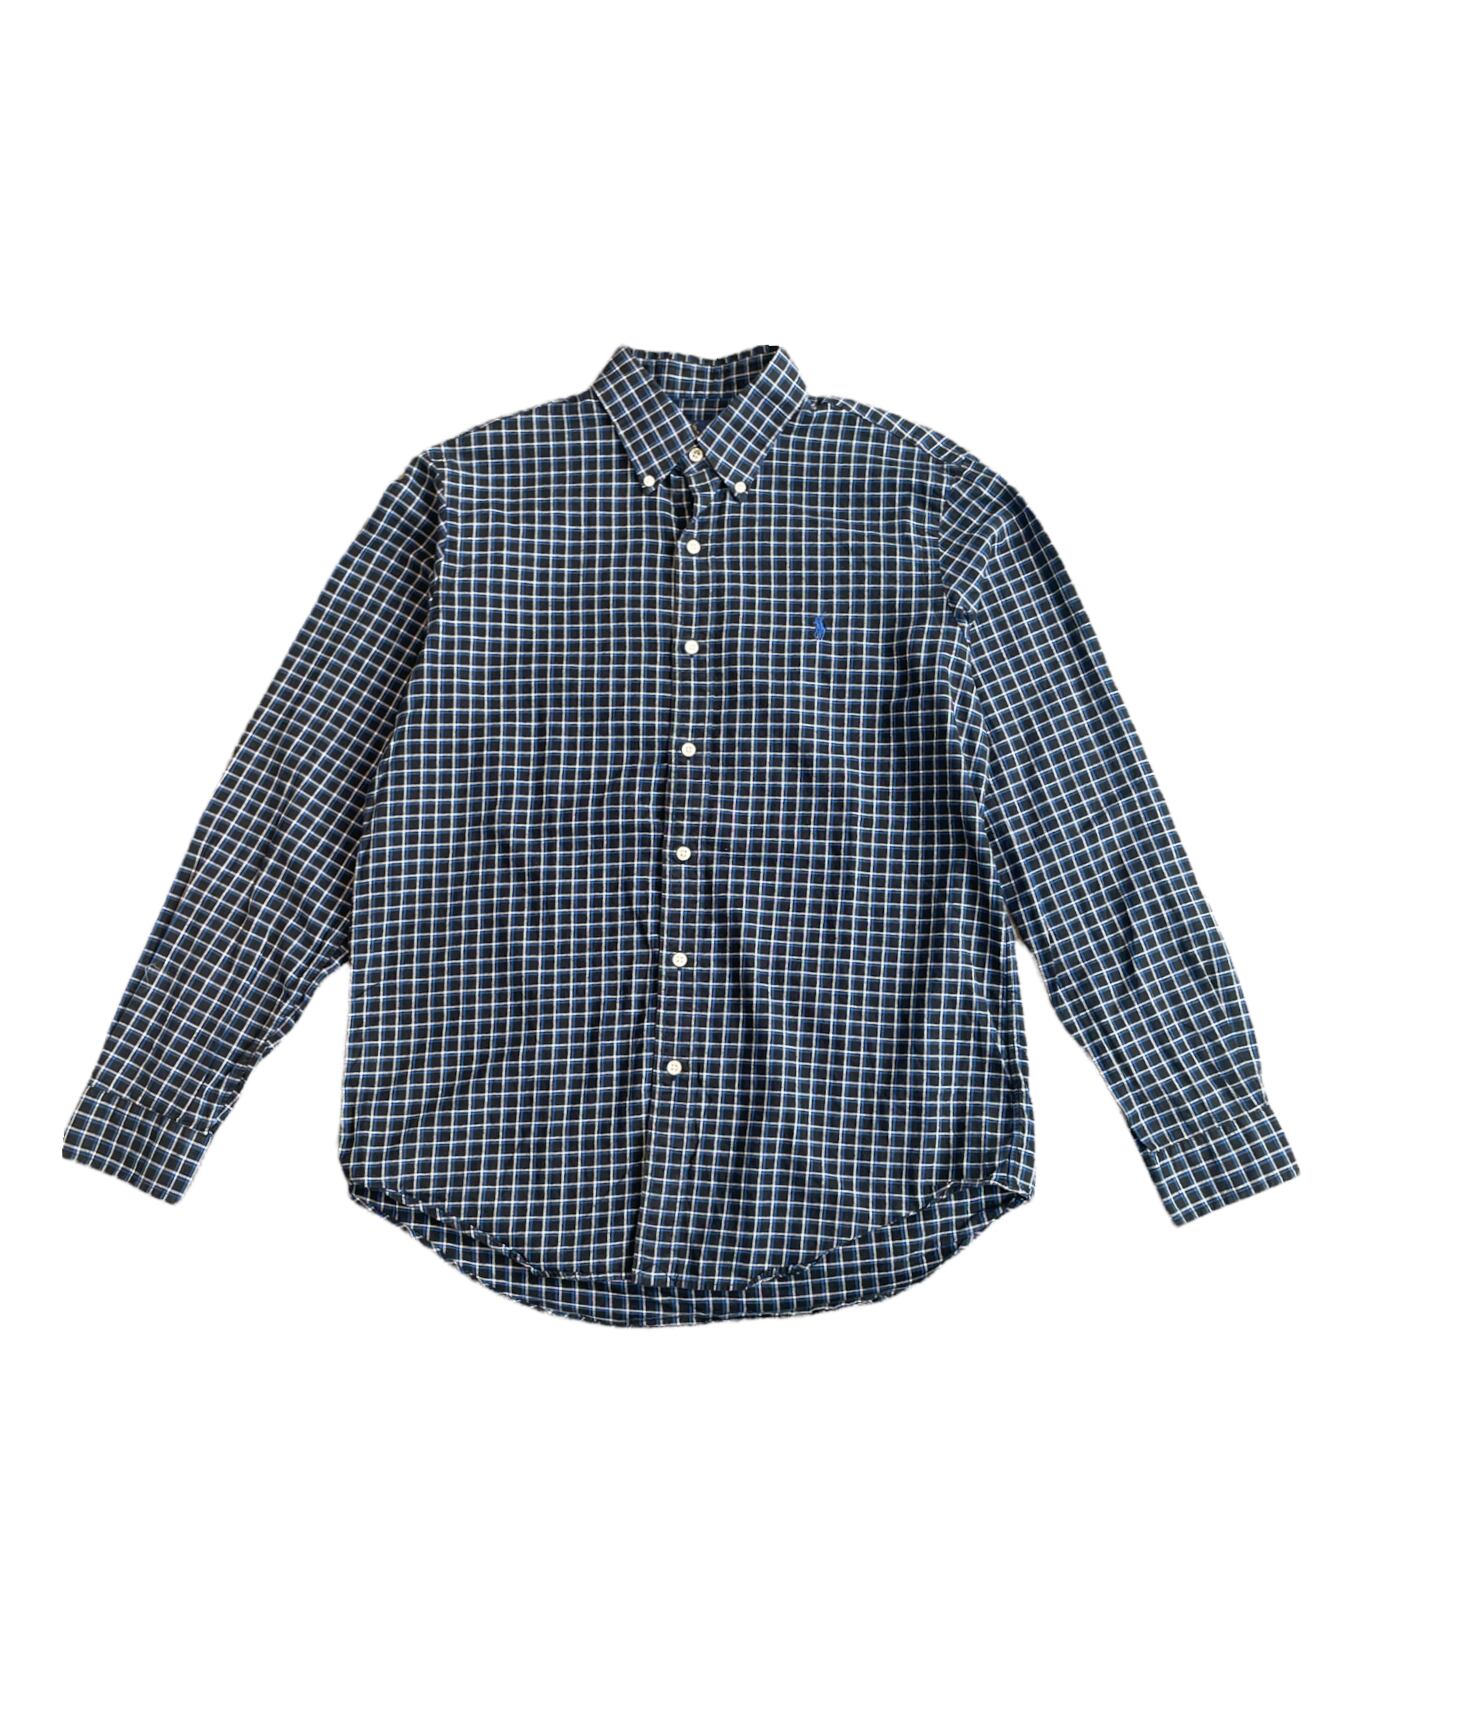 VINTAGE 90s-00s POLO RALPH LAUREN BUTTON DOWN SHIRT -blue check- | BEGGARS  BANQUET公式通販サイト 古着・ヴィンテージ